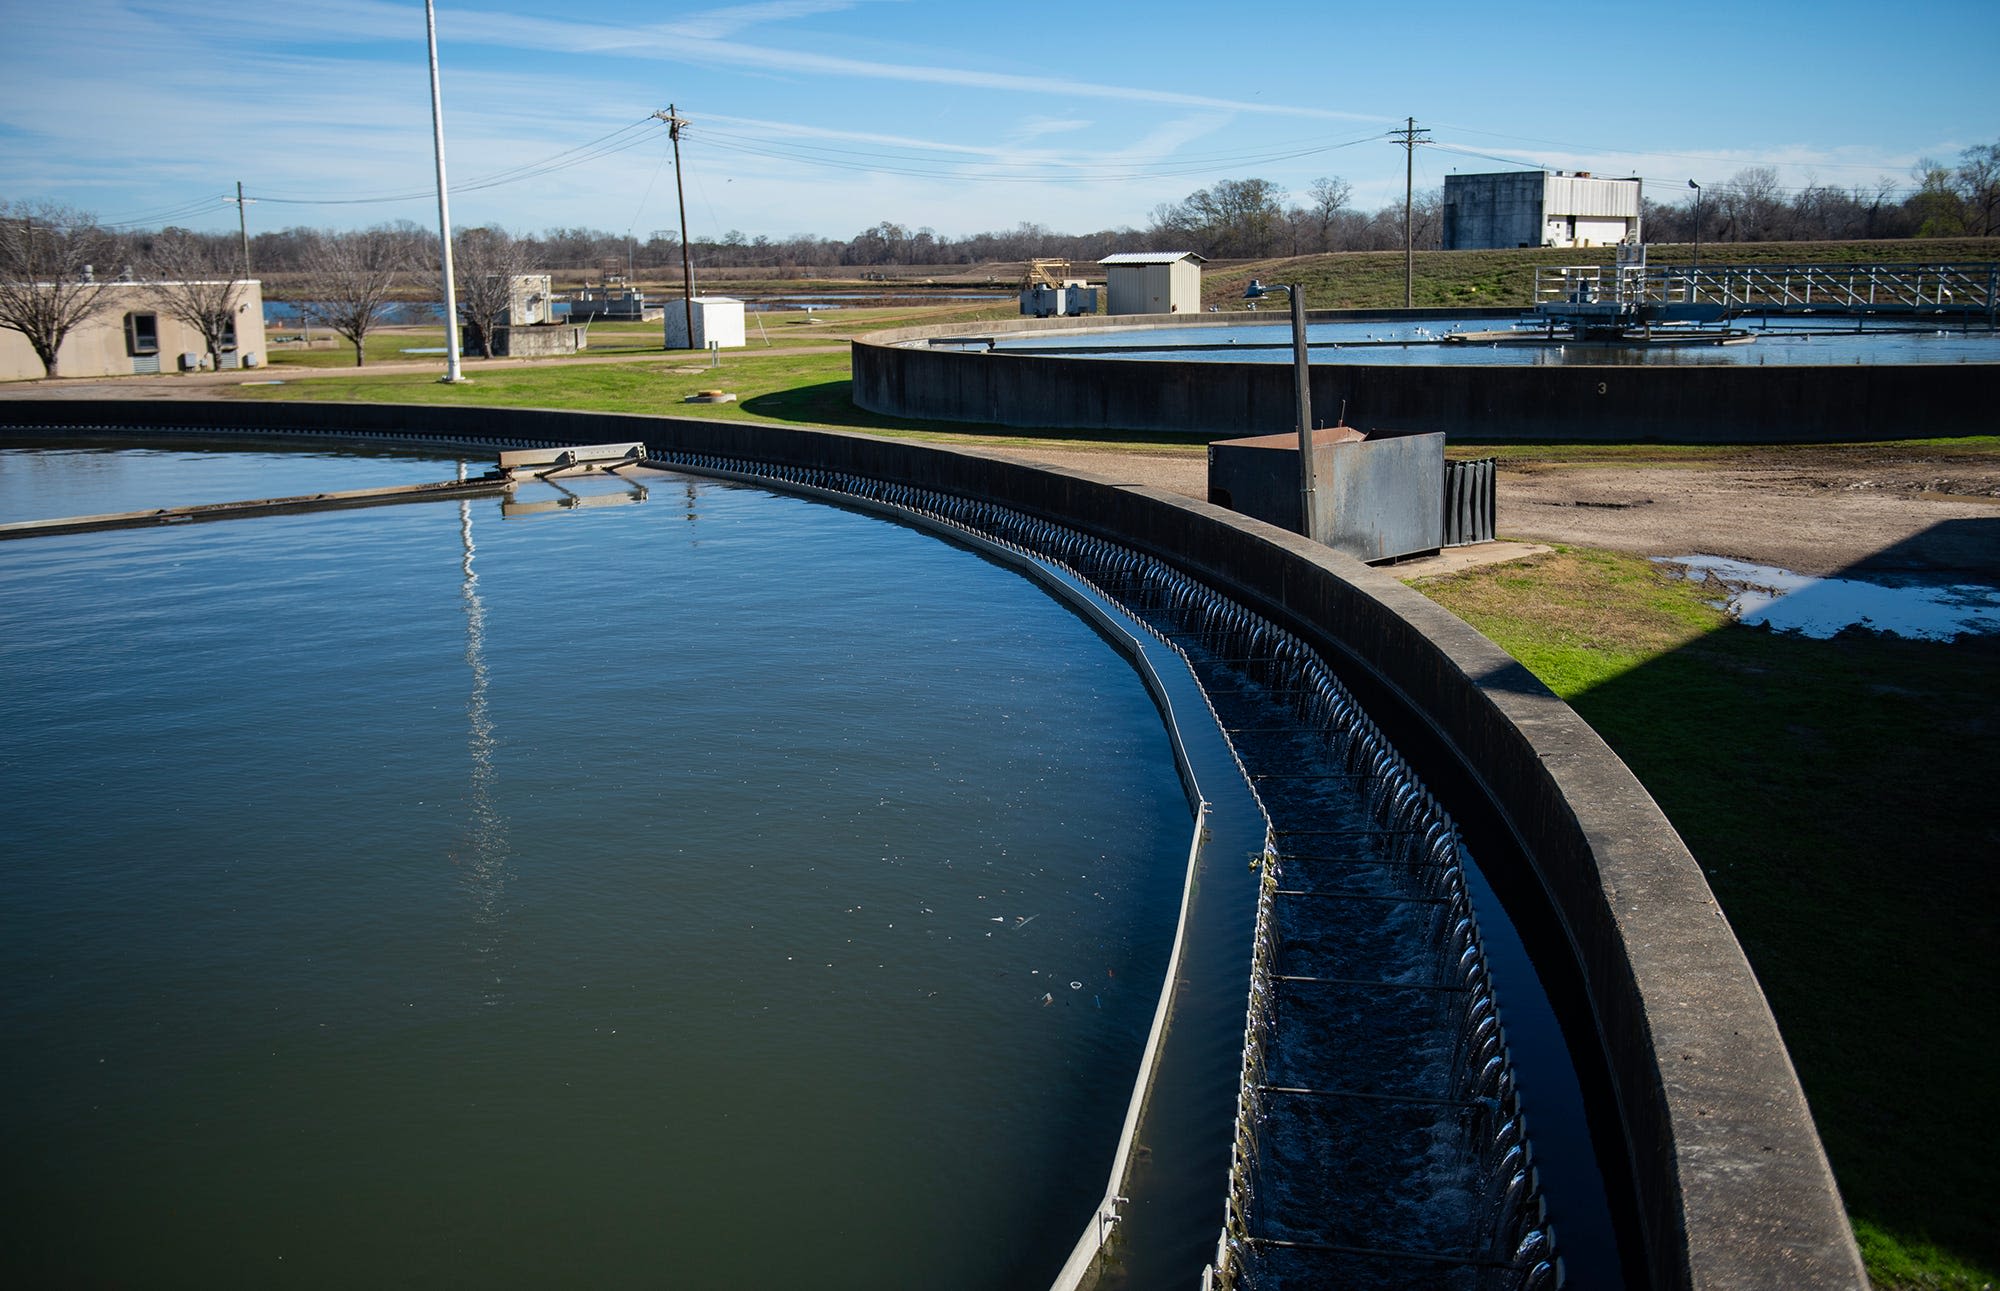 EPA investigations clears MDEQ, MSDH of discrimination claims in funding Jackson Water System